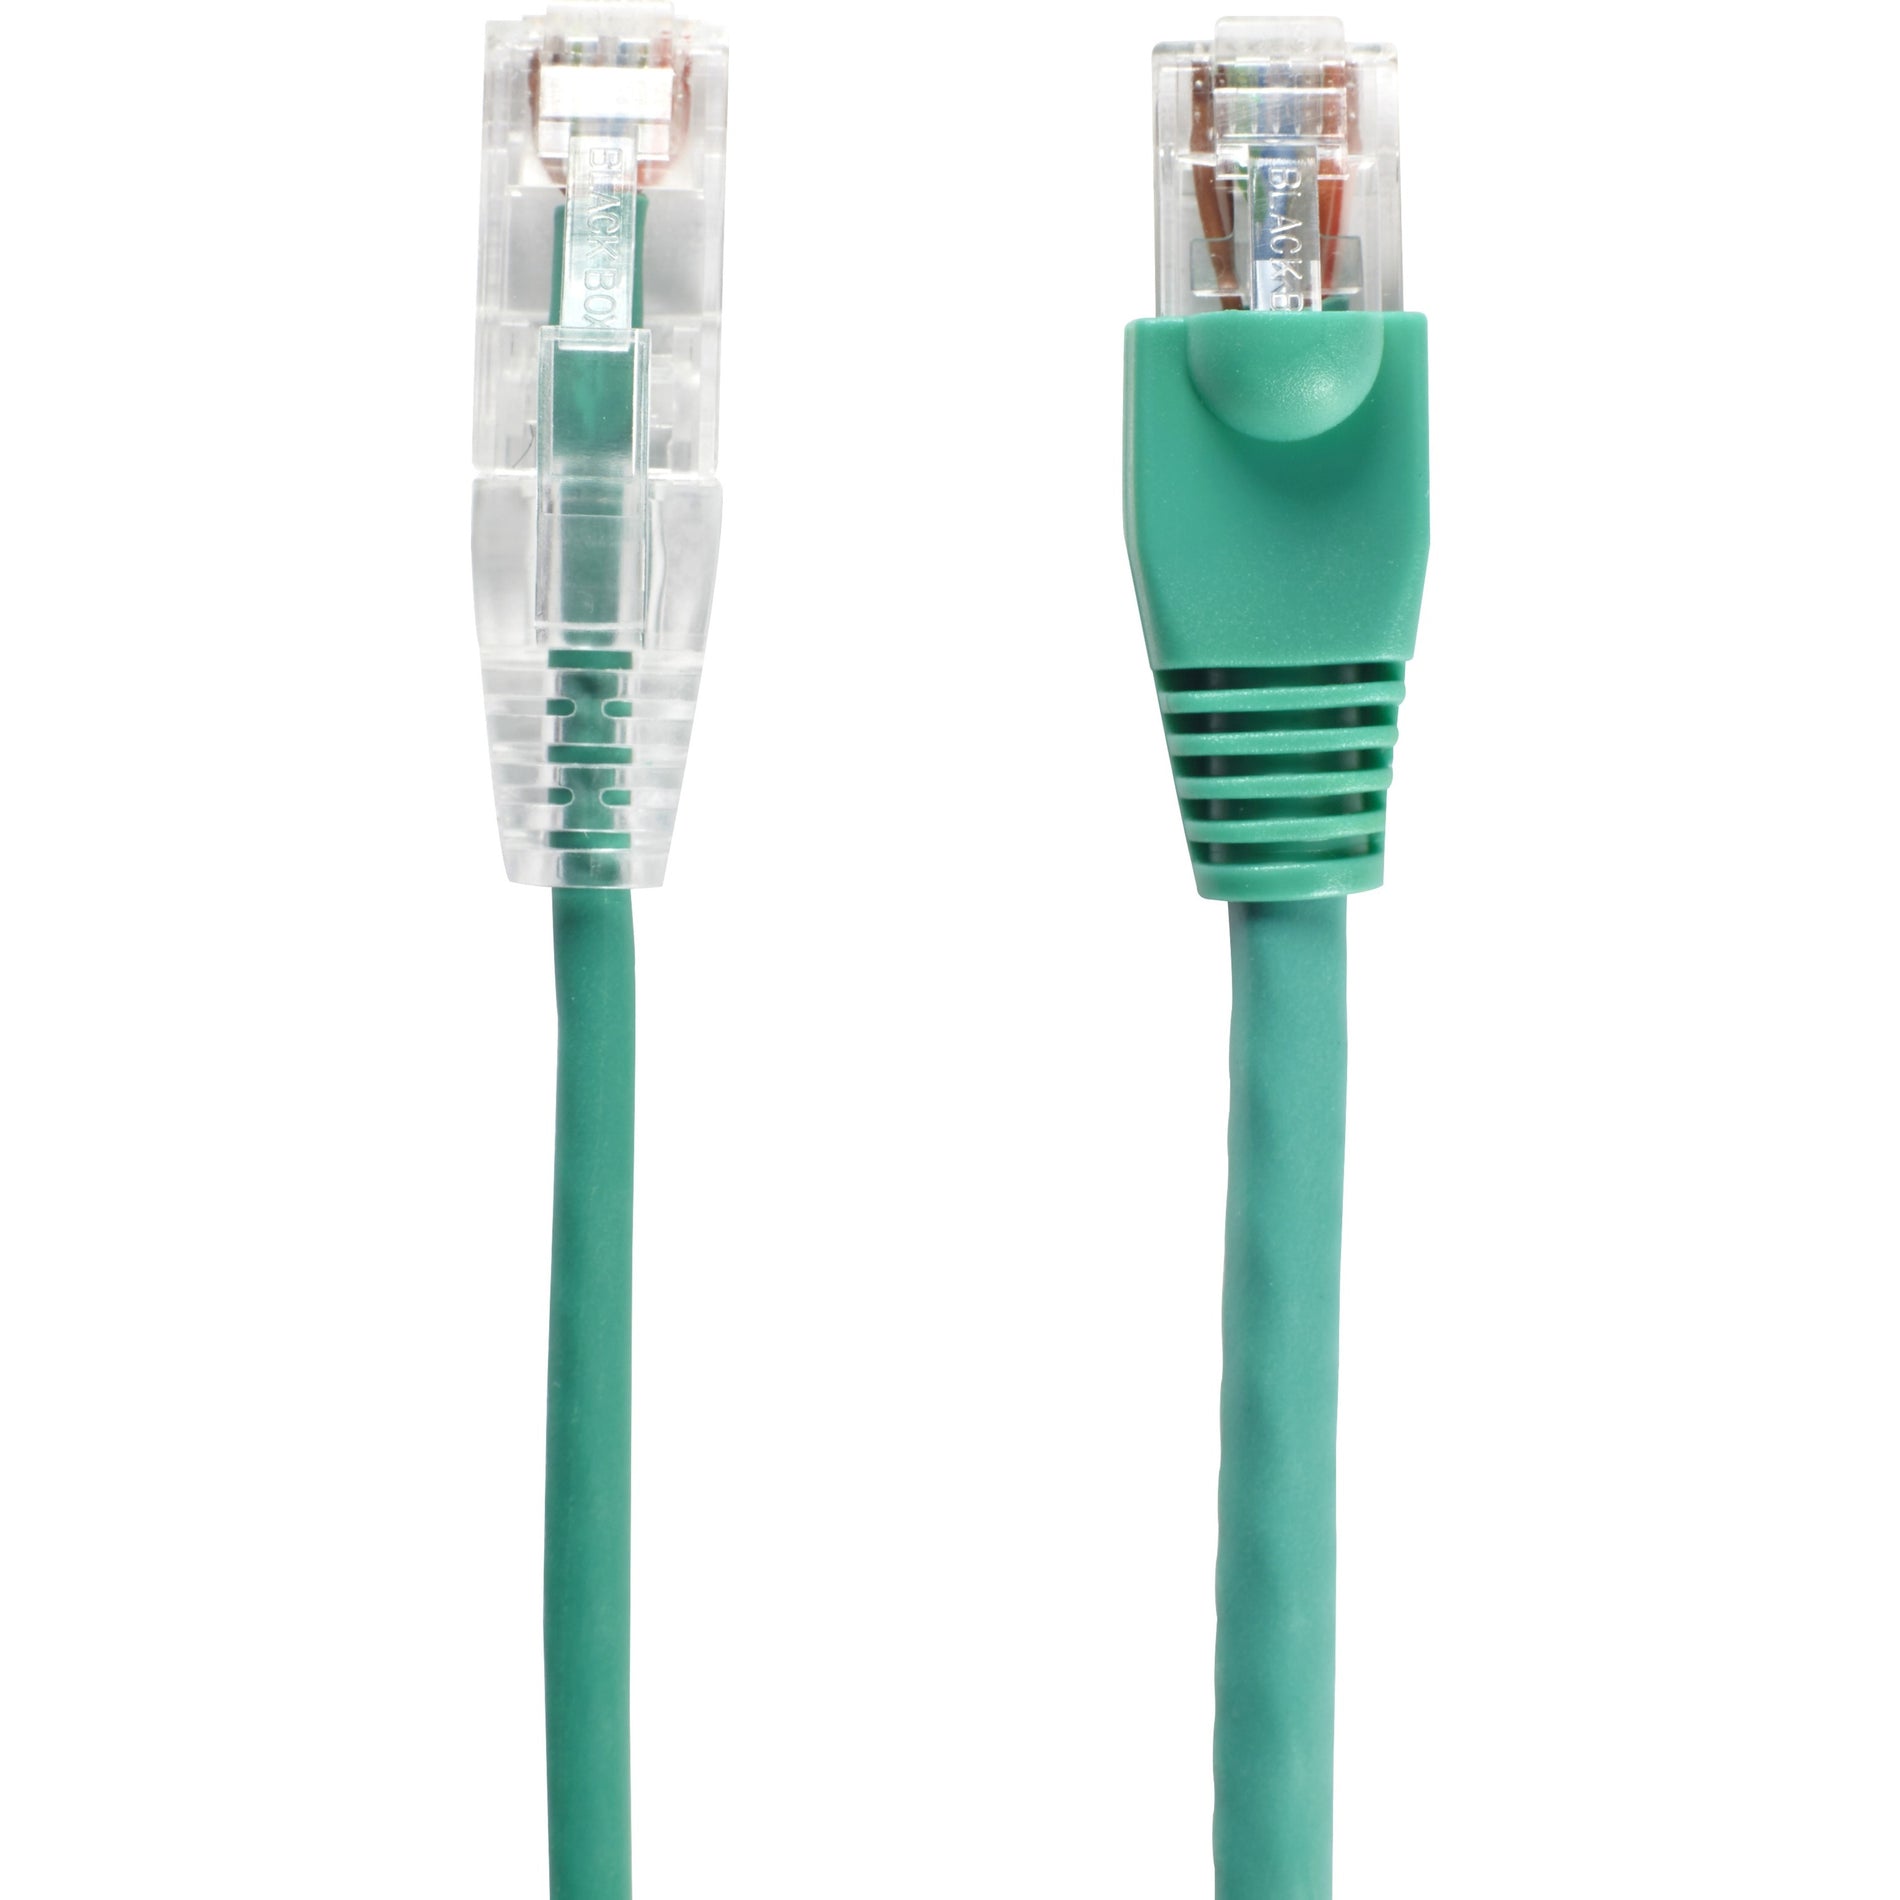 Black Box C6PC28-GN-10 Slim-Net Cat.6 UTP Patch Network Cable, 10 ft, Green